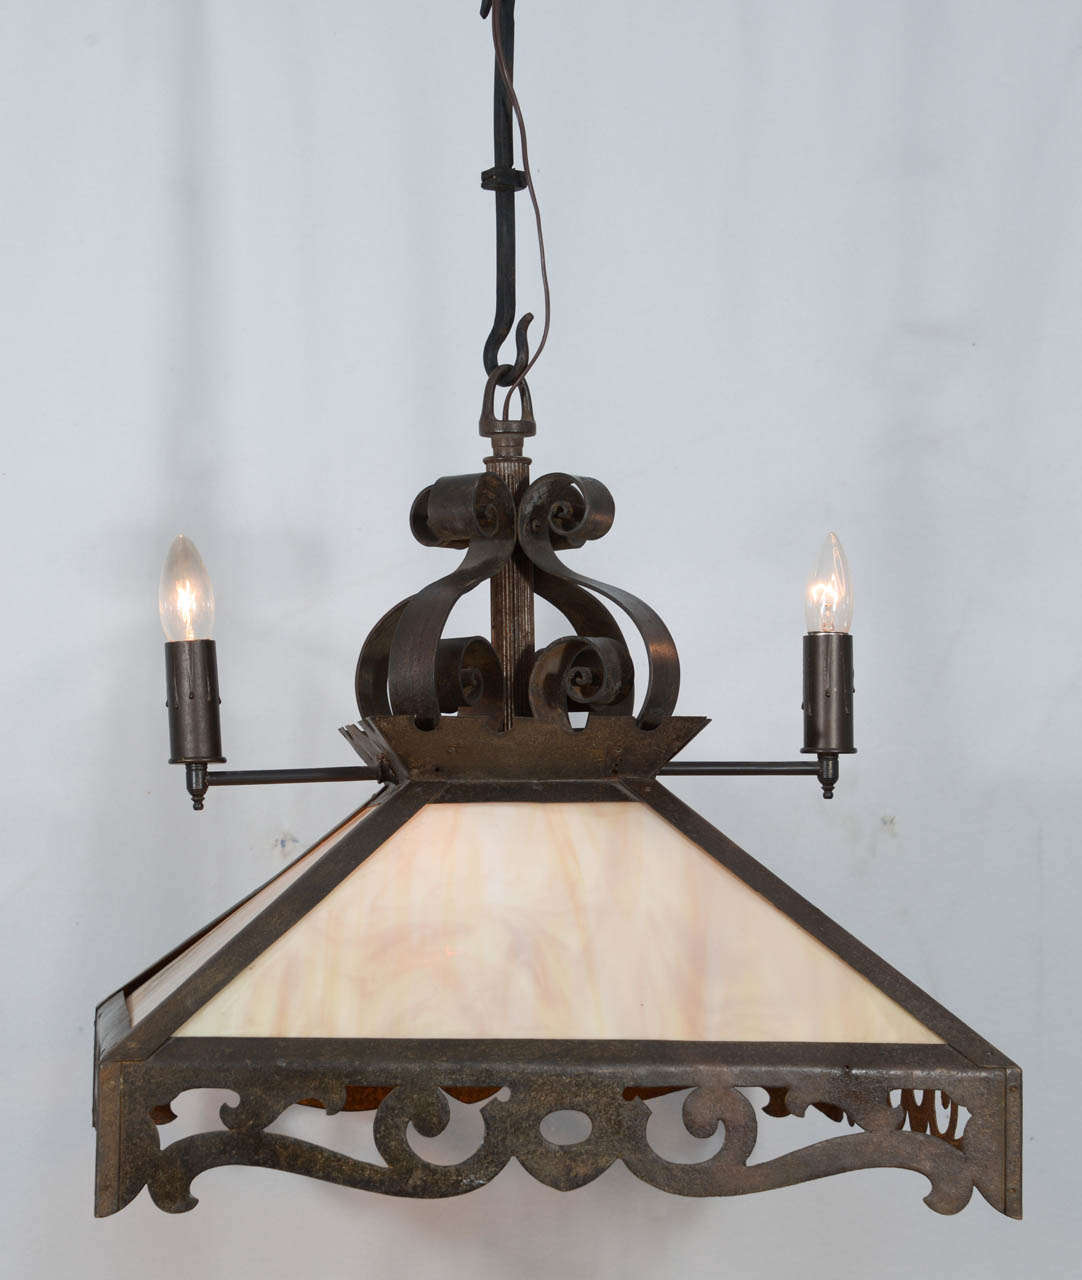 Early 1900s, combination of two-light gas and four-light electric, wrought iron with amber slag glass chandelier. This fixture originally hung from a gas pipe but in the conversion to all electric, has been adapted with a custom hand-wrought chain.